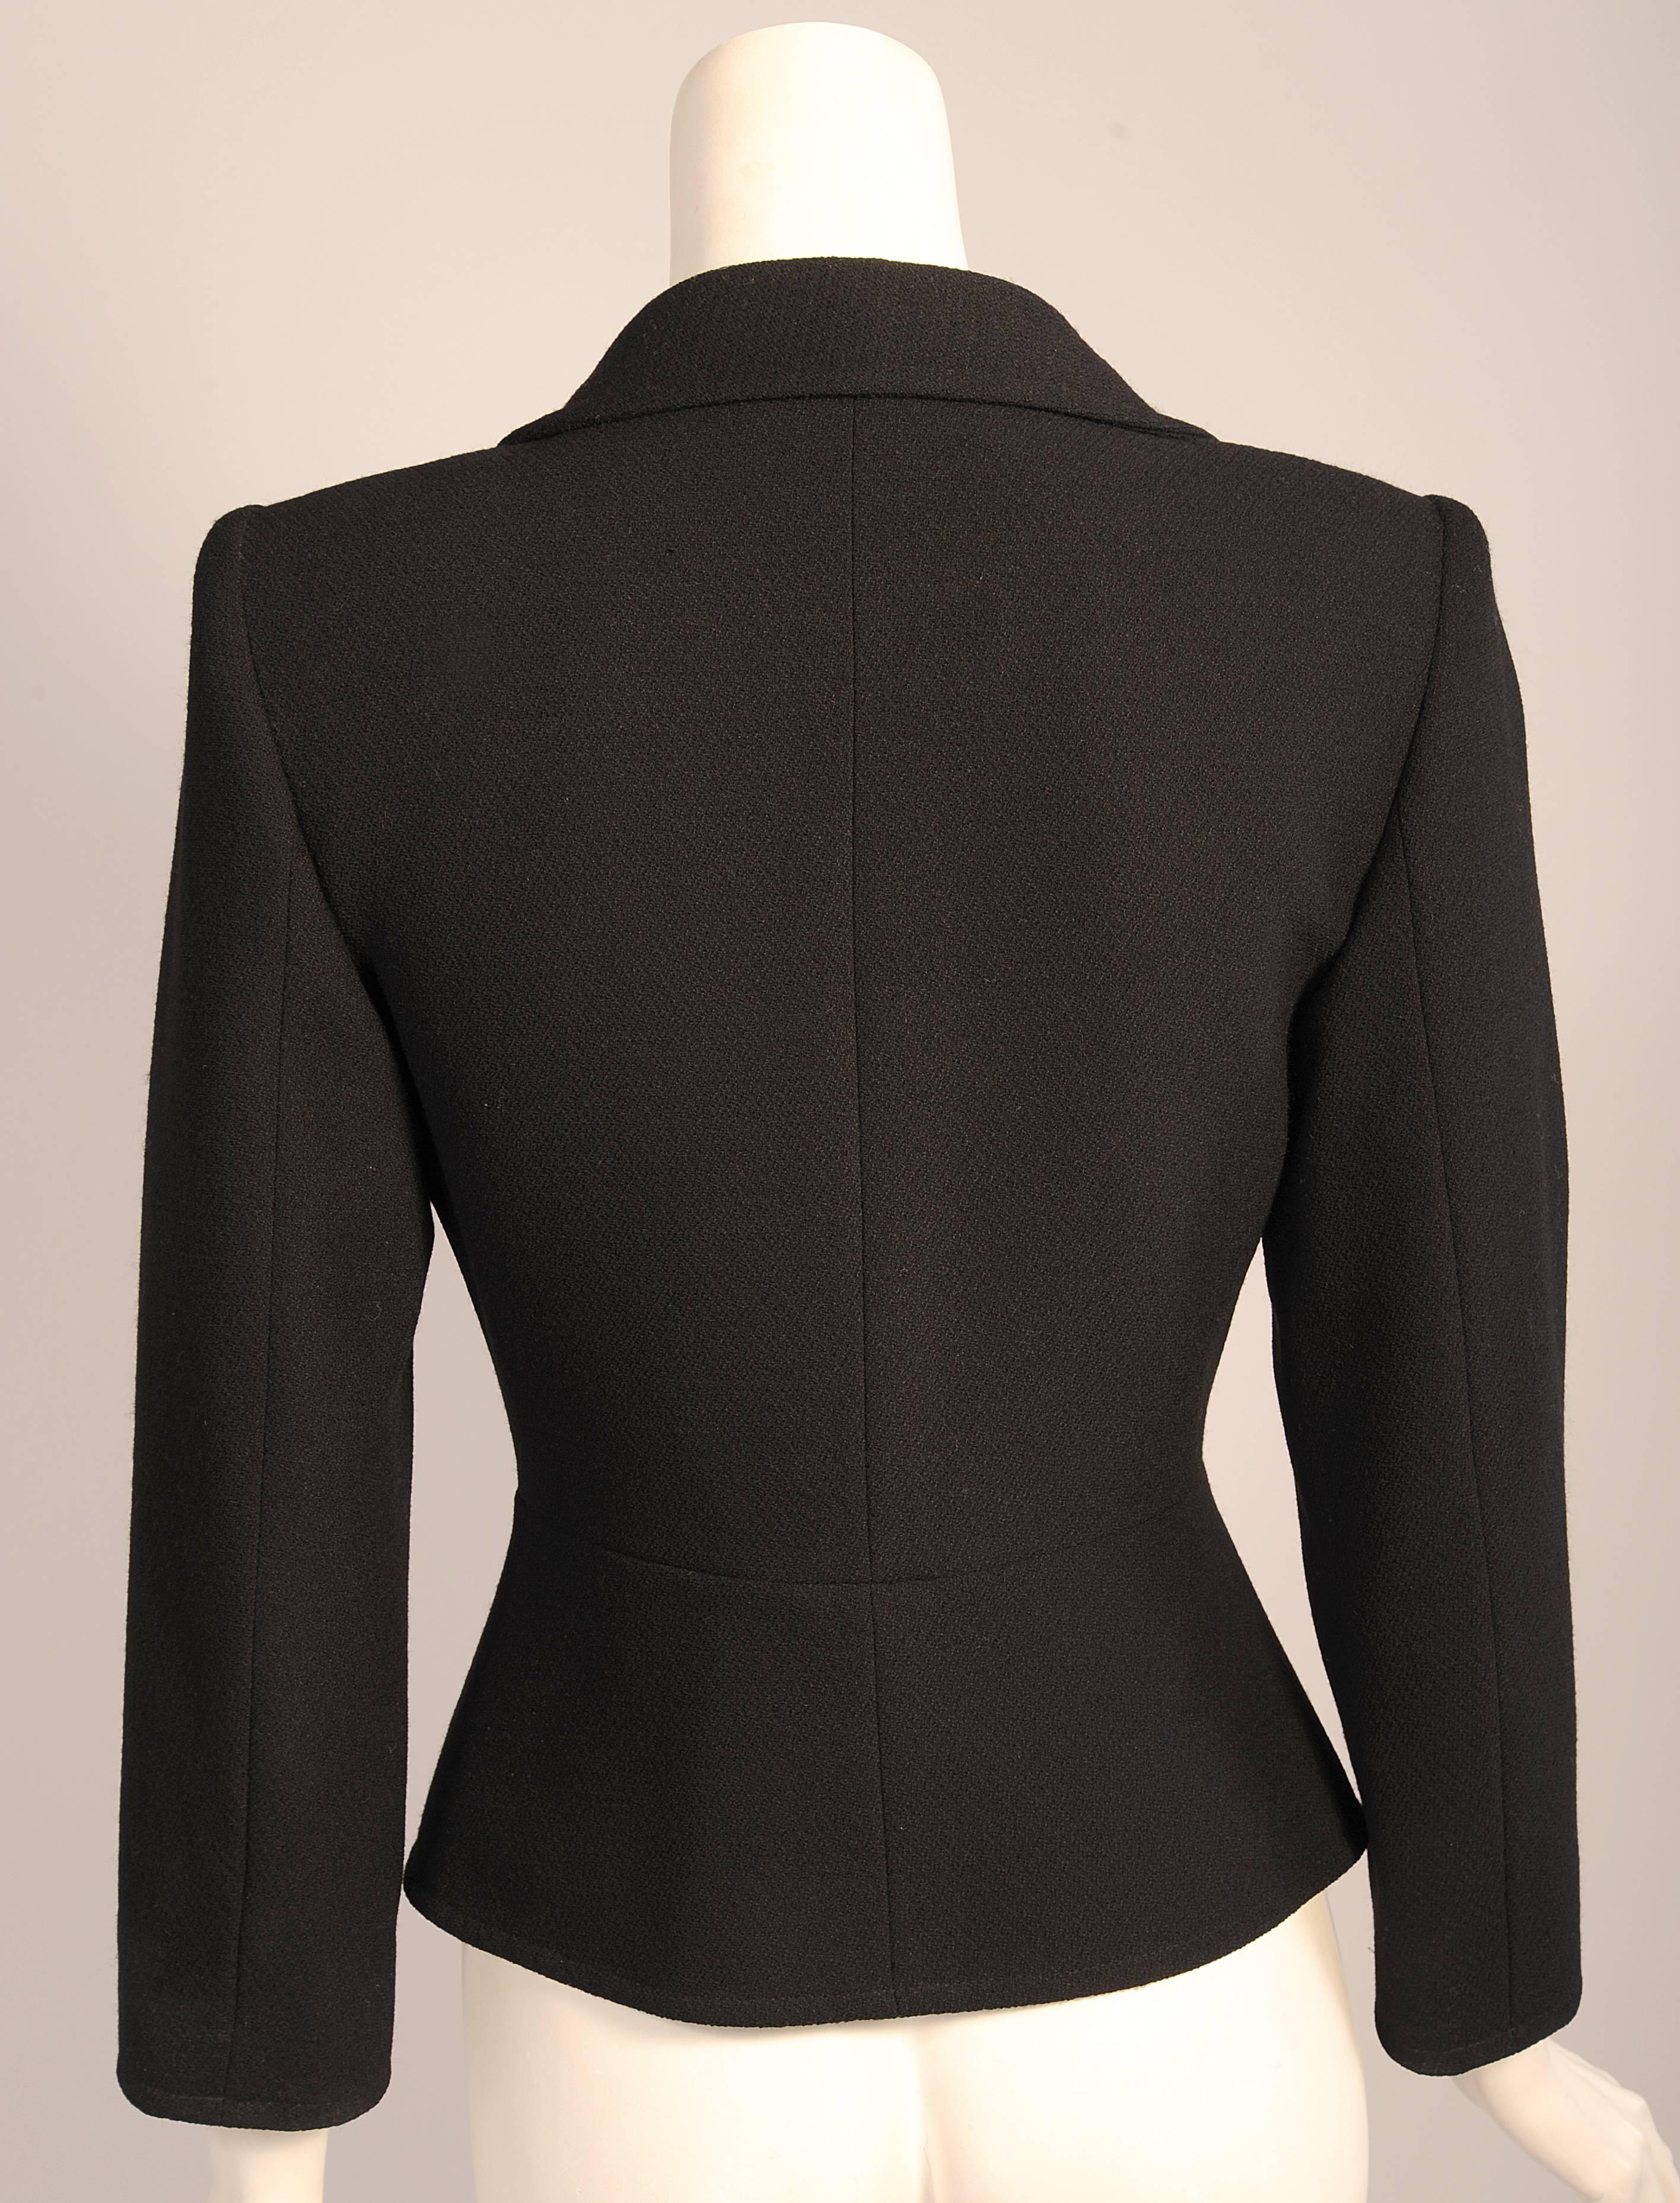 This Christian Lacroix black wool  crepe blazer has a notched lapel, single button closure and two smaller buttons on the jacket pockets. It is fully lined and is marked a size 36. It is in excellent condition.
Measurements;
Shoulders 16